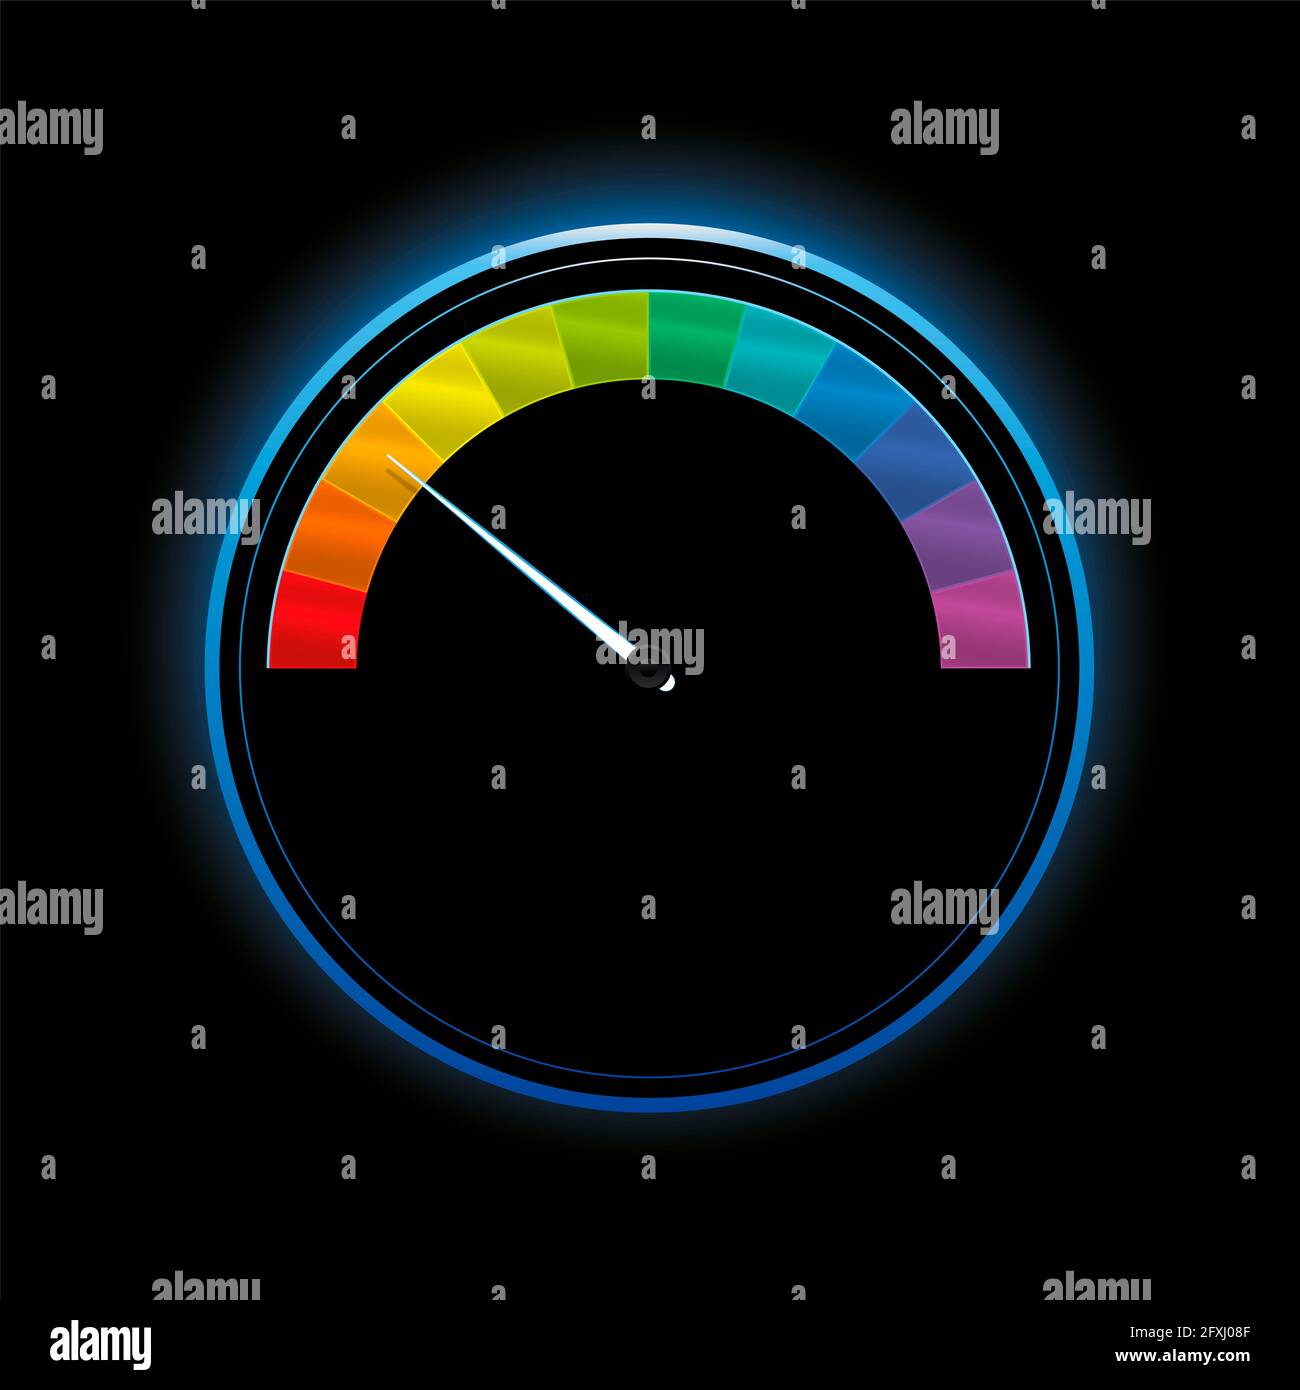 https://c8.alamy.com/comp/2FXJ08F/speedometer-gauge-with-rainbow-colored-scale-fields-colorful-subdivisions-as-rating-indicator-semicircle-graduation-display-instrument-2FXJ08F.jpg